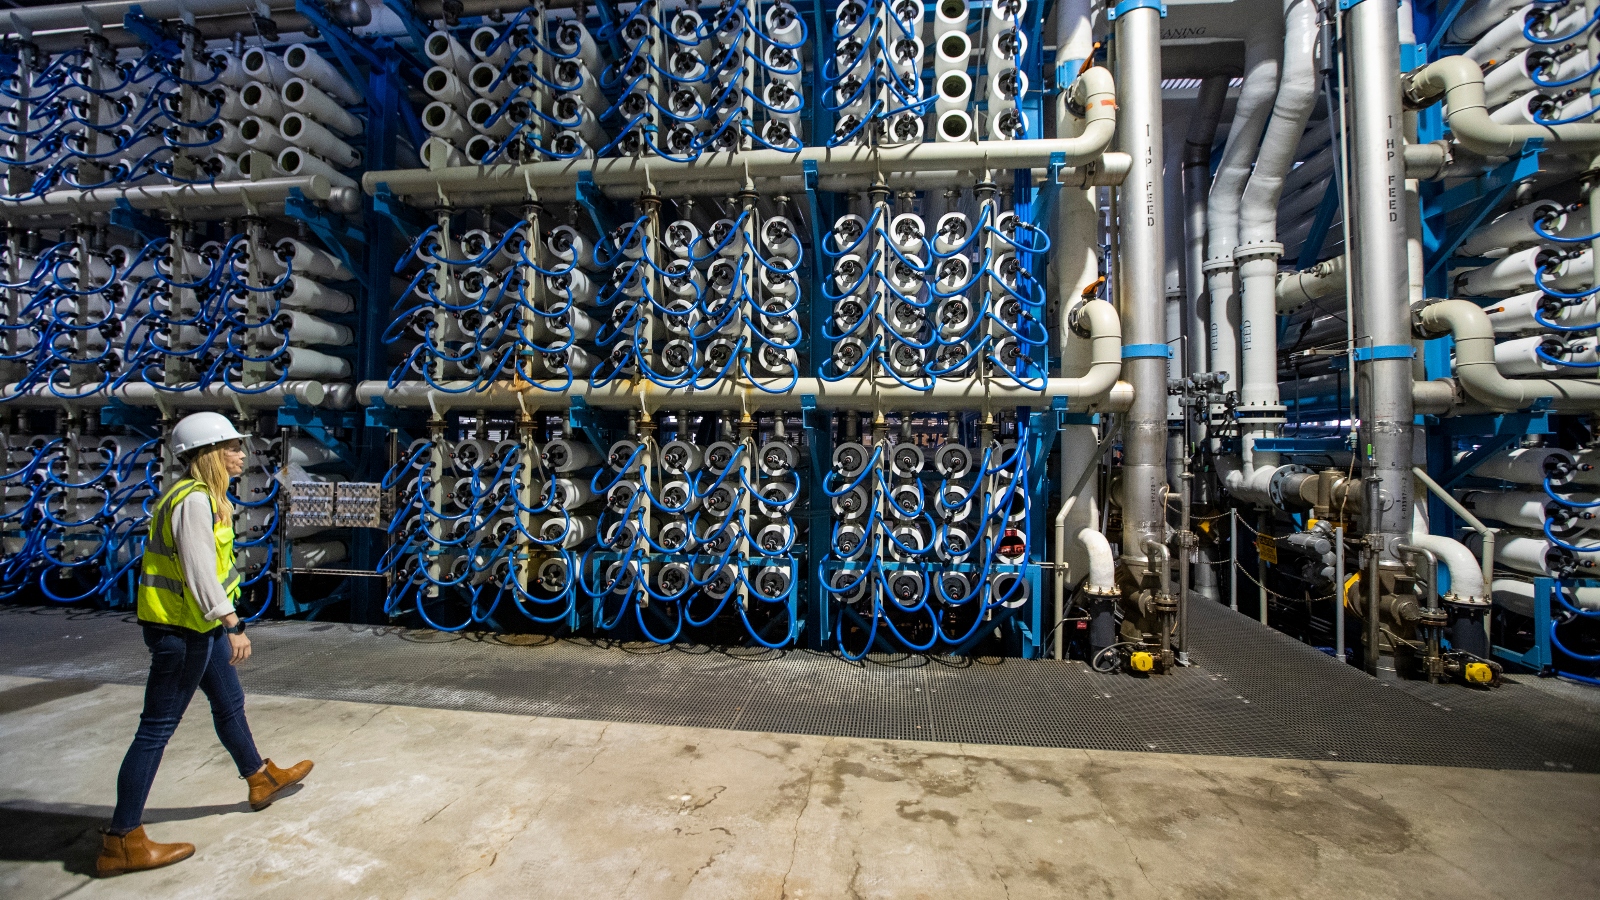 A technician walks past reverse osmosis membranes at a desalination plant in Carlsbad, California.